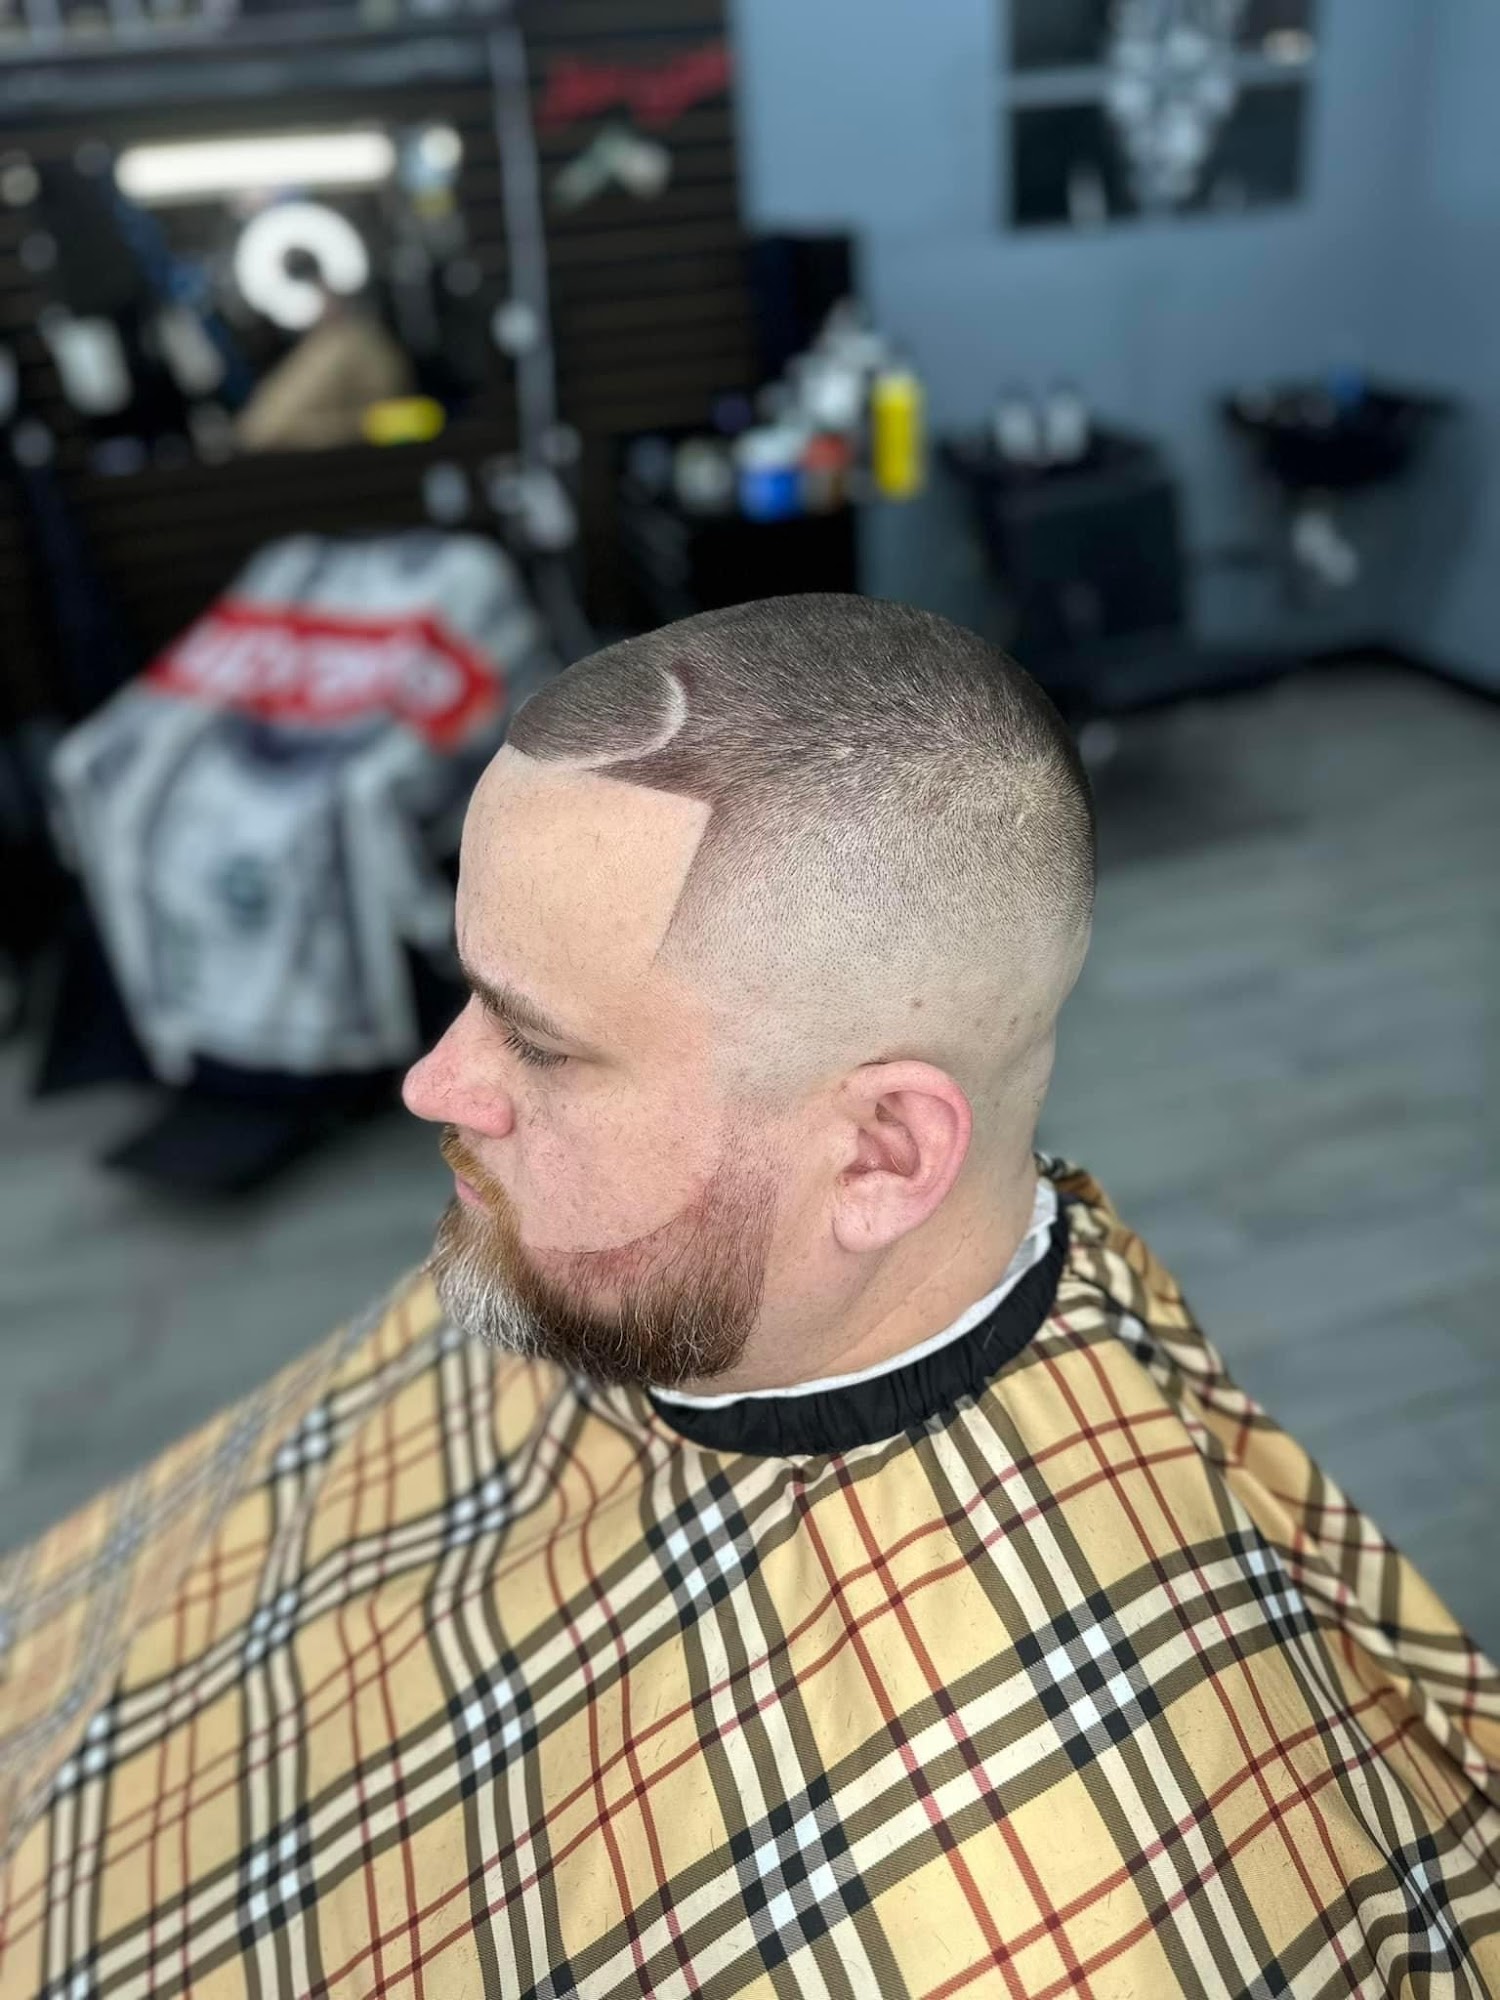 House of Cutz Barber Studios 1405 Spencer Hwy, South Houston Texas 77587